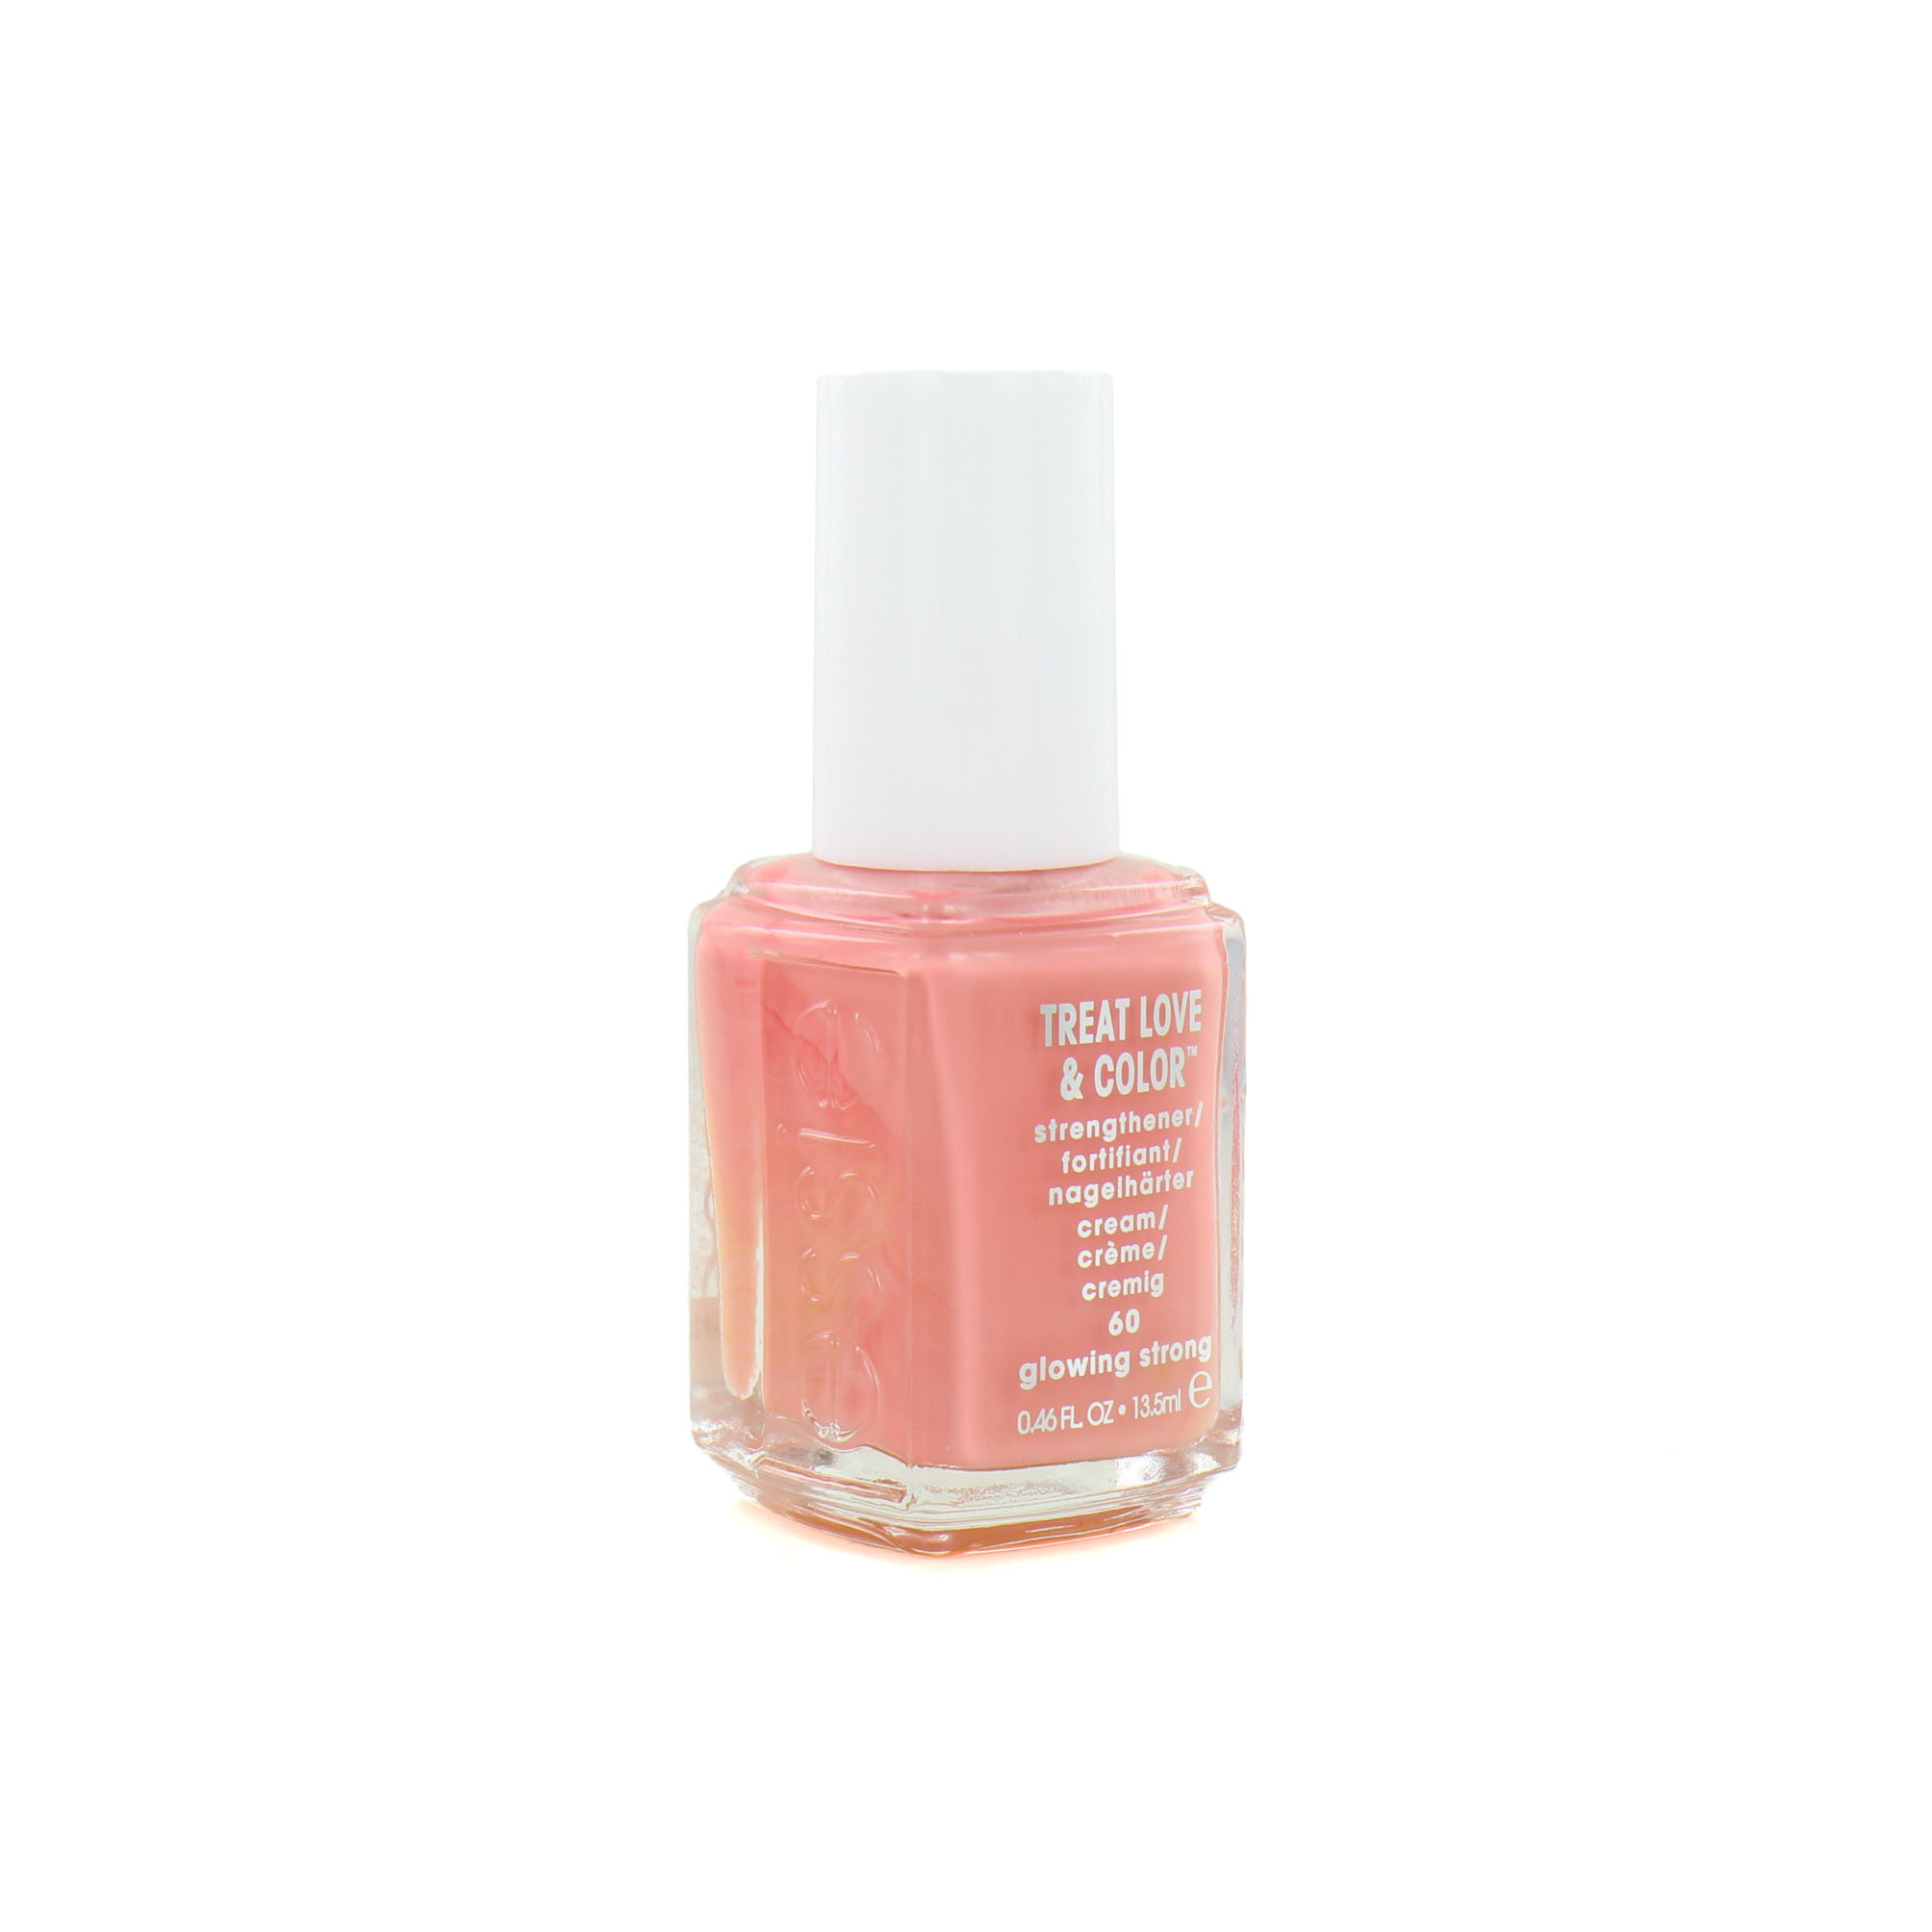 Essie Treat Love - Strengthener Kaufen 60 Glowing & Strong Color - Blisso